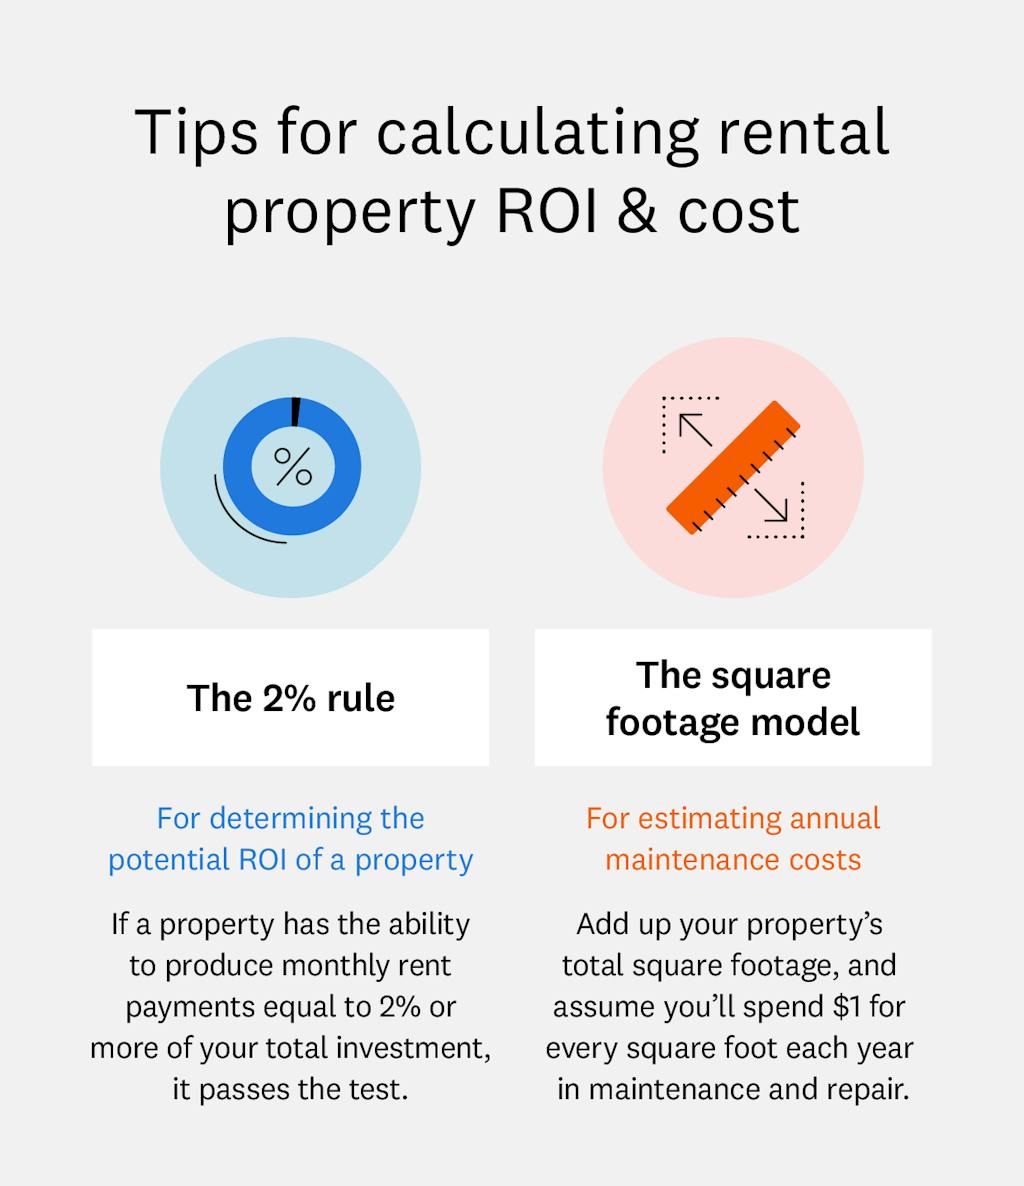 tips-for-calculating-rental-property-roi-and-cost